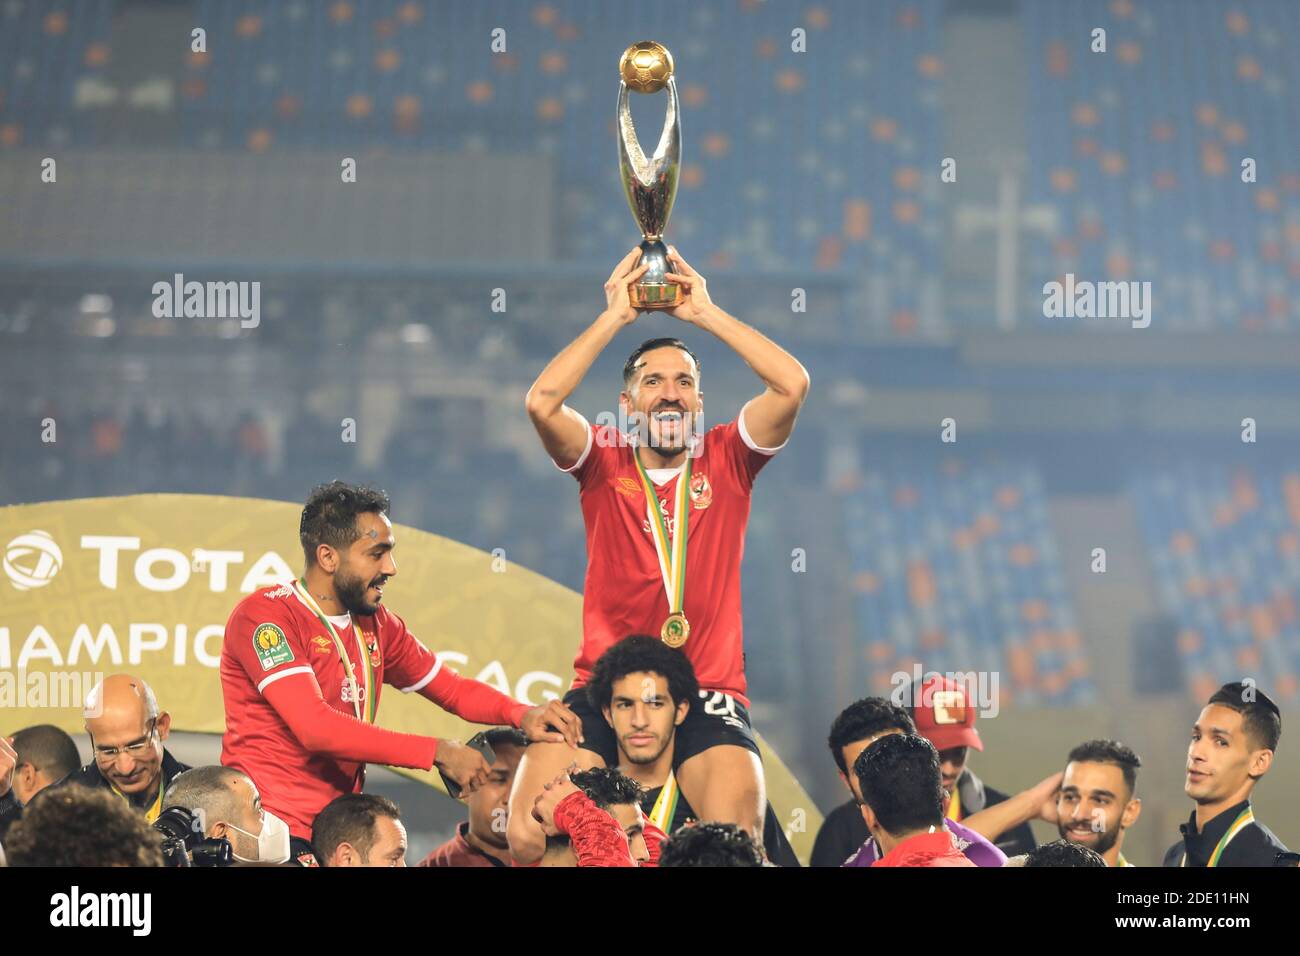 Cairo, Egypt. 27th Nov, 2020. Al Ahly's Ali Maaloul holds up the trophy as his team celebrates winning the African Champions League Final soccer match against Zamalek at Cairo International Stadium. Credit: Sameh Abo Hassan/dpa/Alamy Live News Stock Photo